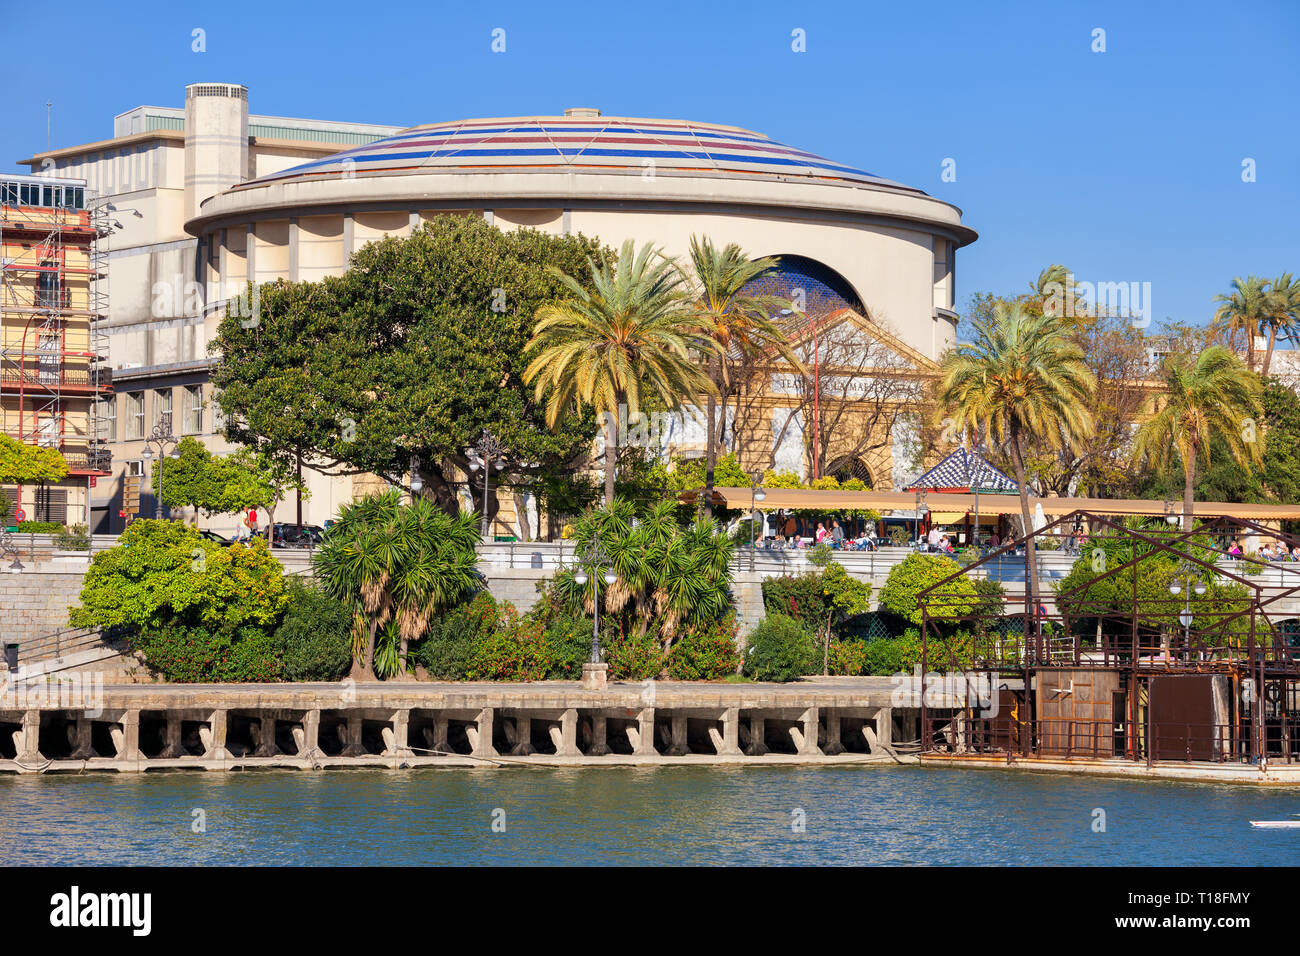 Spain, city of Seville, Teatro de la Maestranza theater, opera house and conert hall as seen from the Guadalquivir river Stock Photo